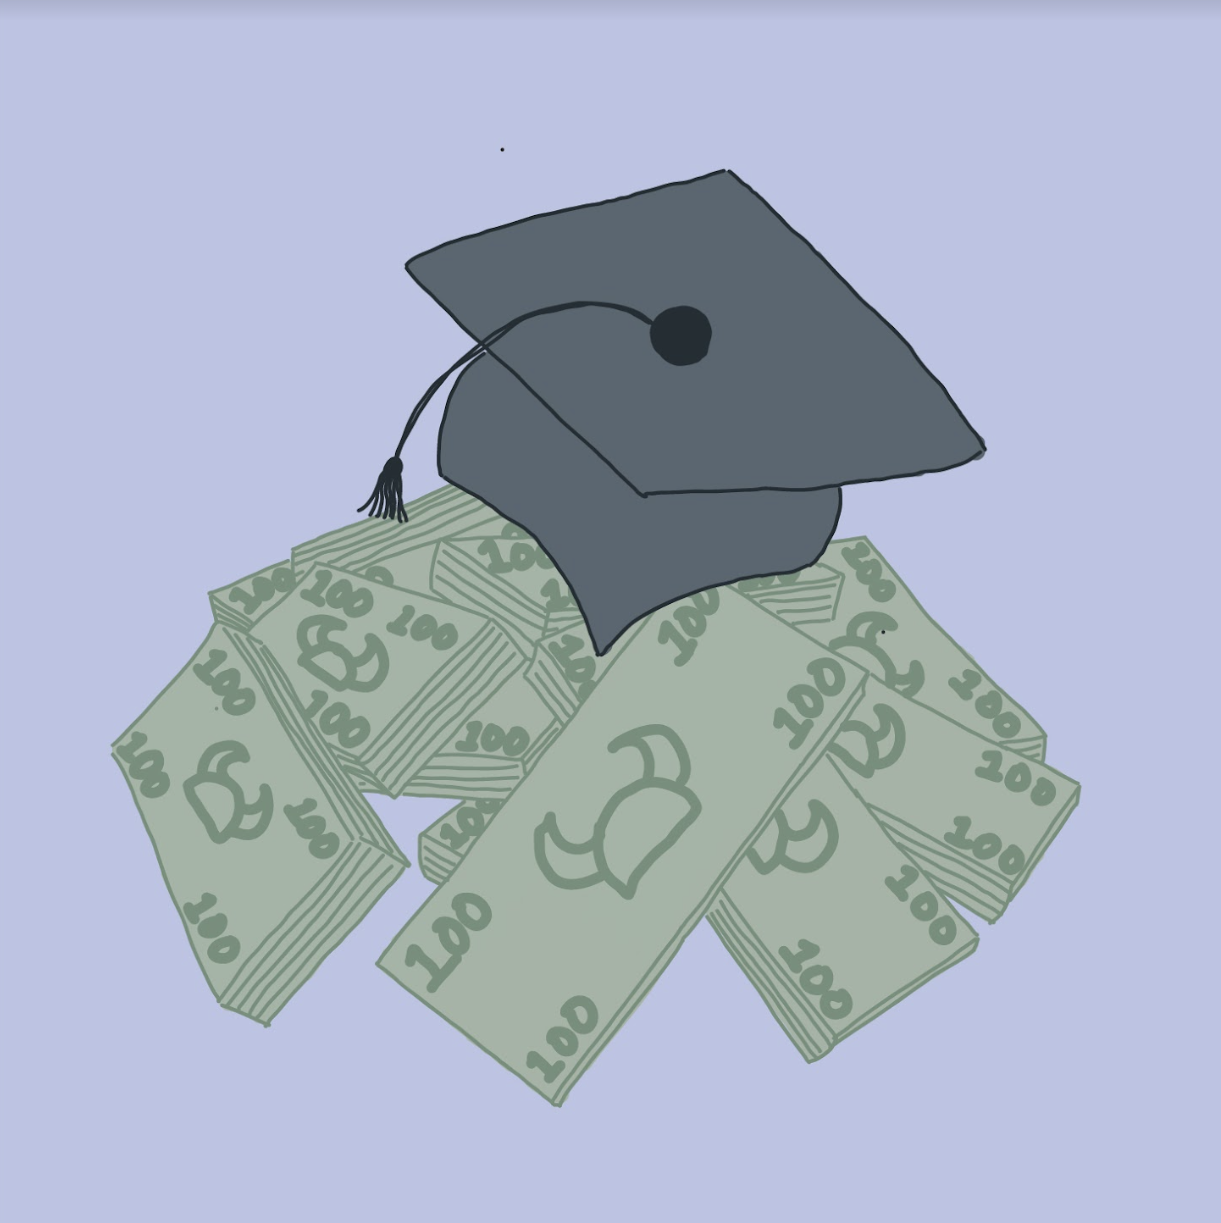 The ever-growing cost of college tuition has many students worried for their future.